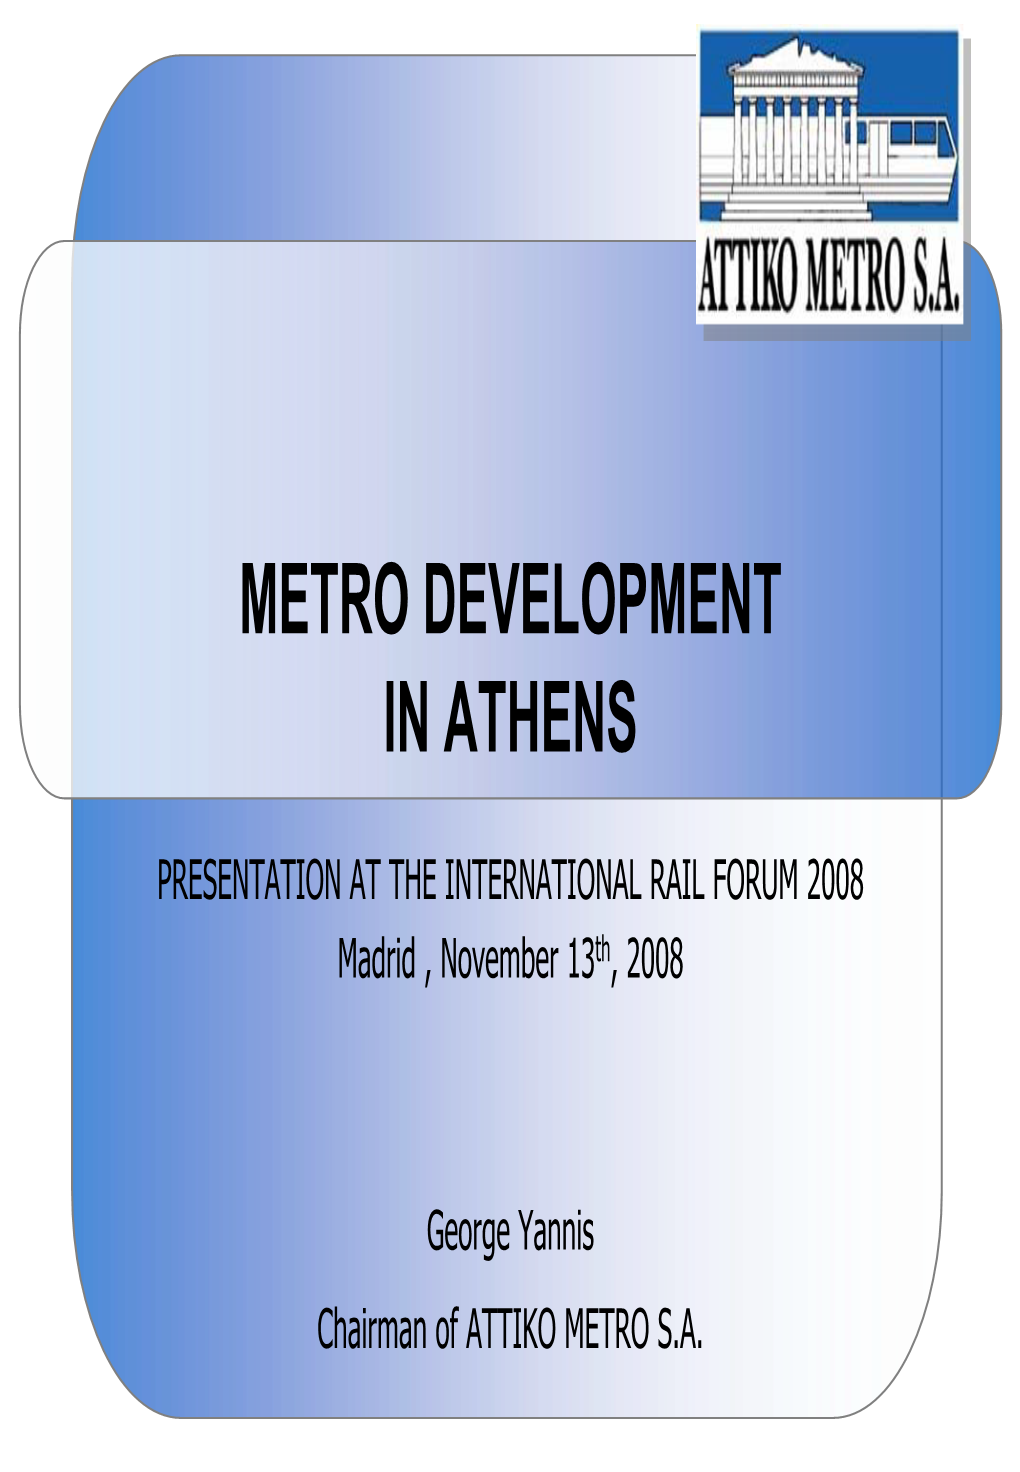 Athens Metro Construction: – 30,4 Km of Underground Network in Operation (Construction 1991 – 2007) – 36 Km Under Design and Construction